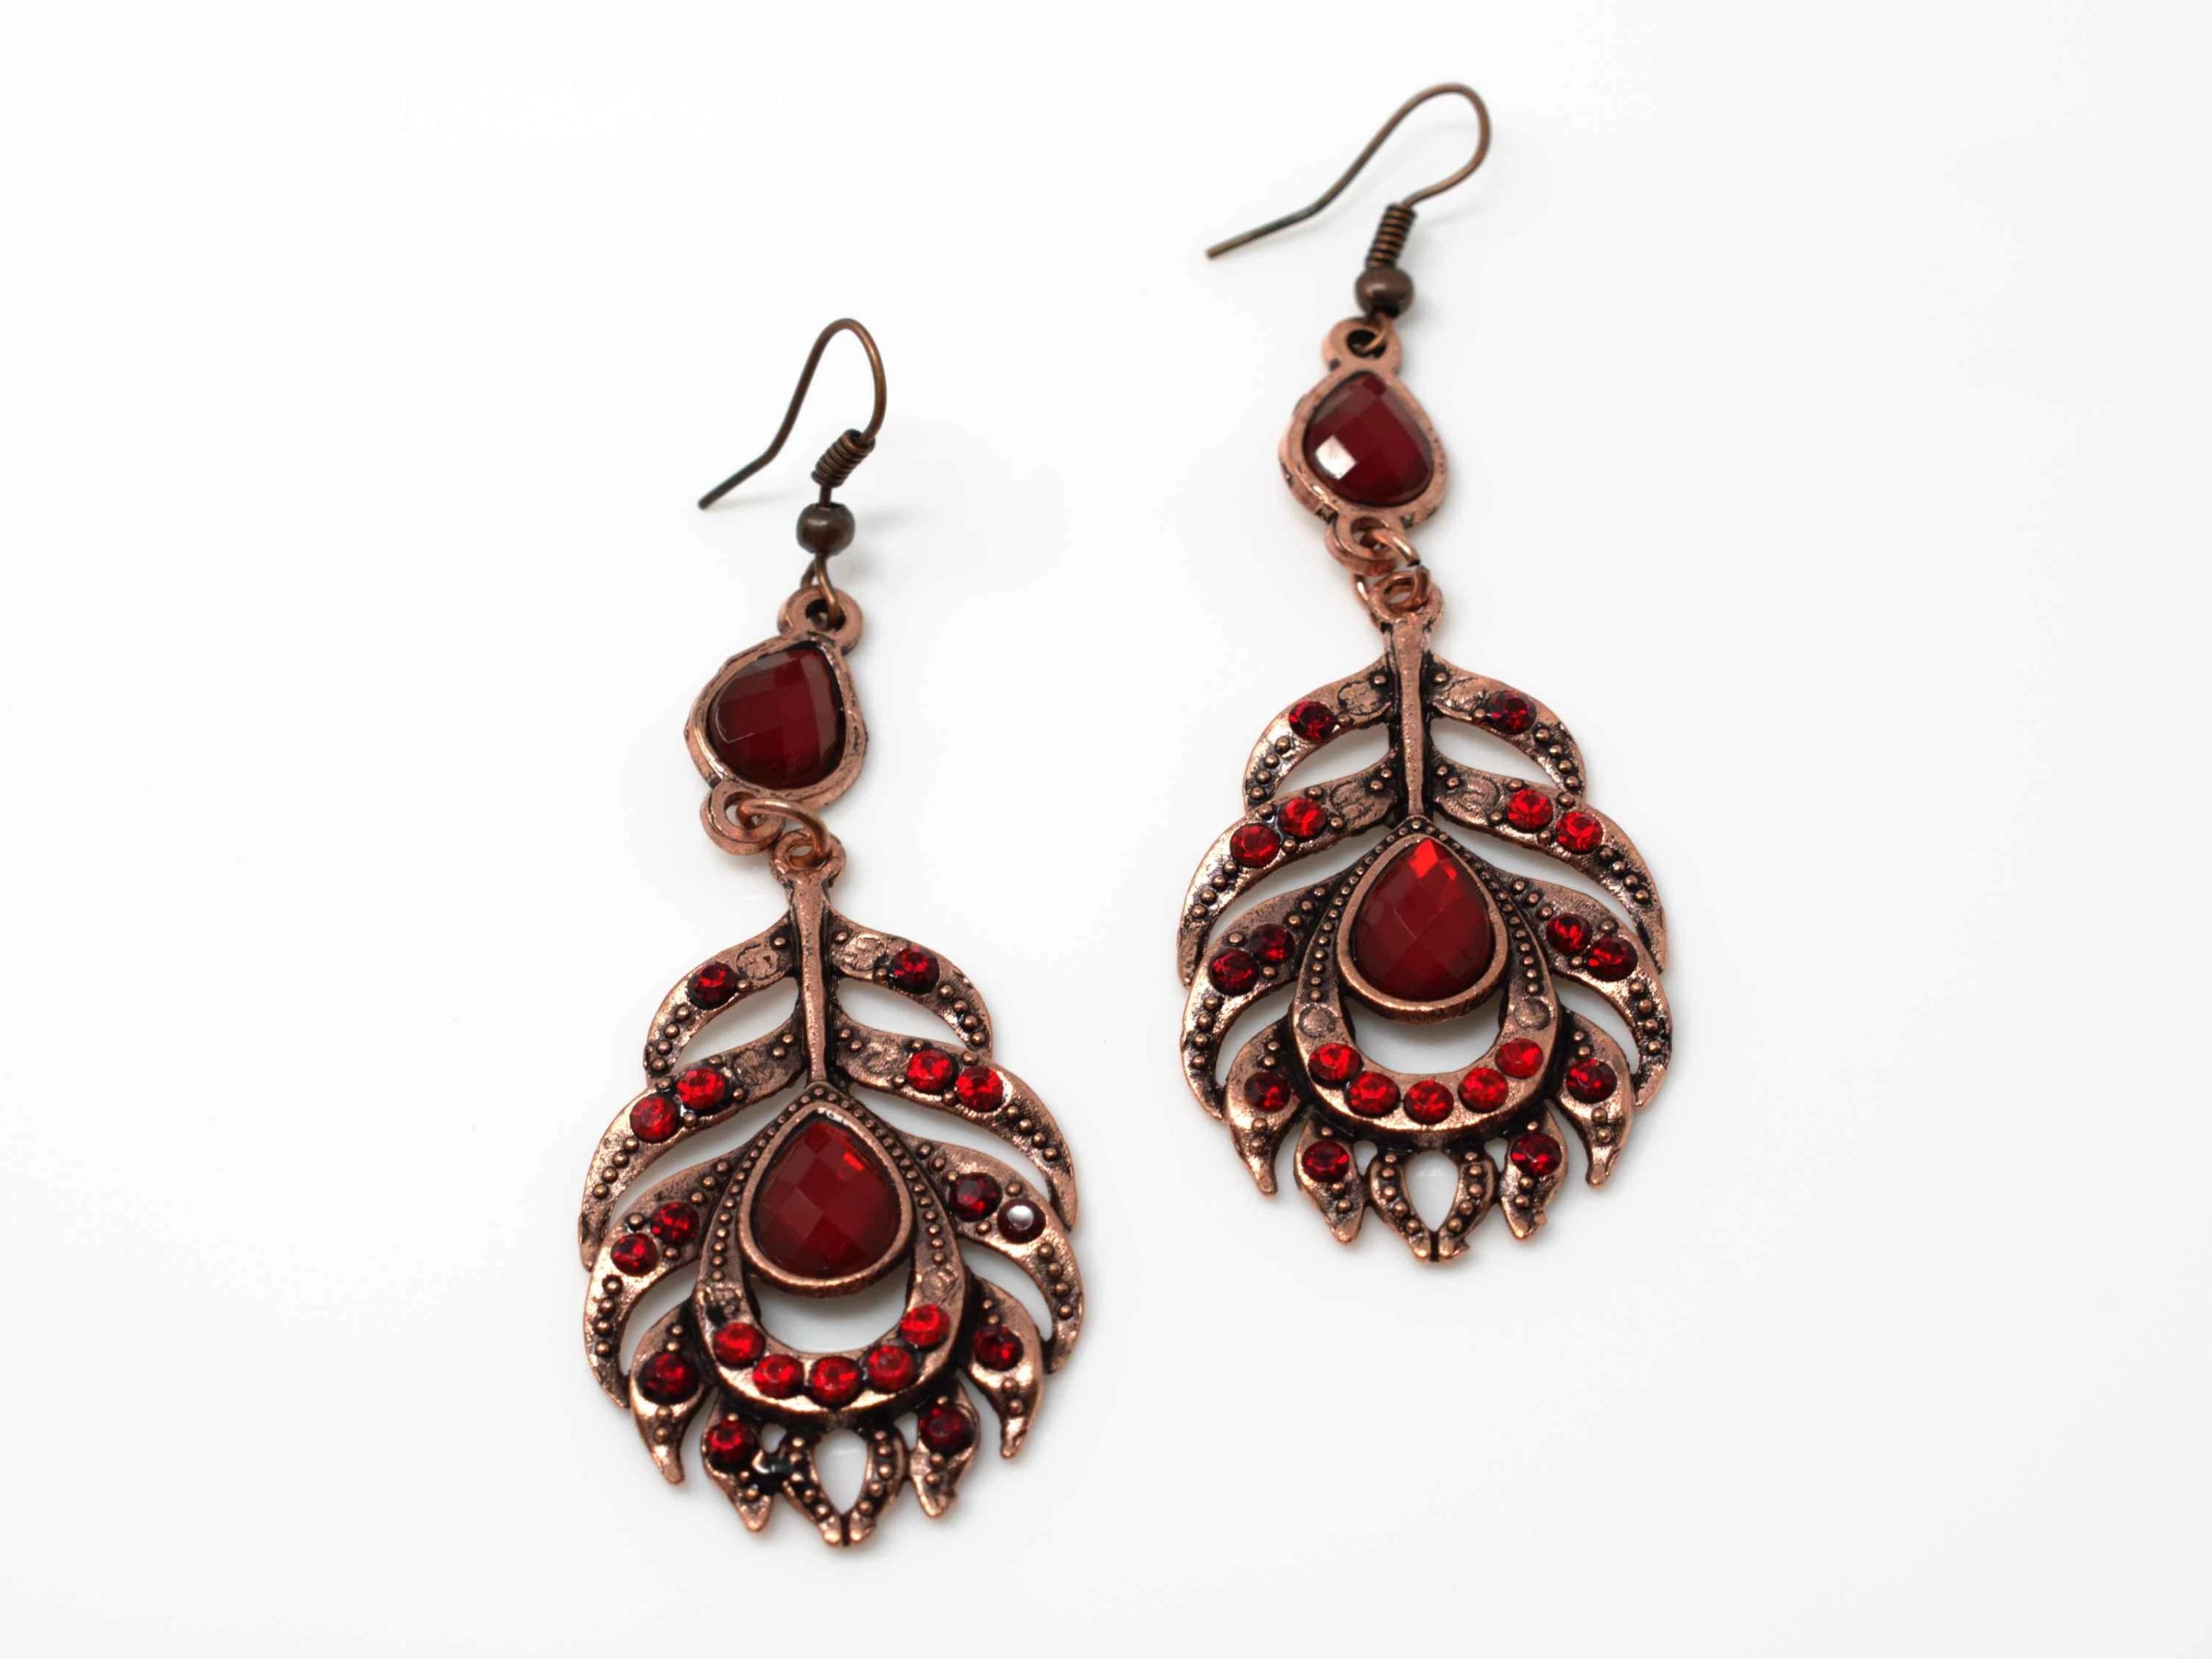 A dainty rose drop dangle feather fashion earring with red accent stones and a fish hook clasp.